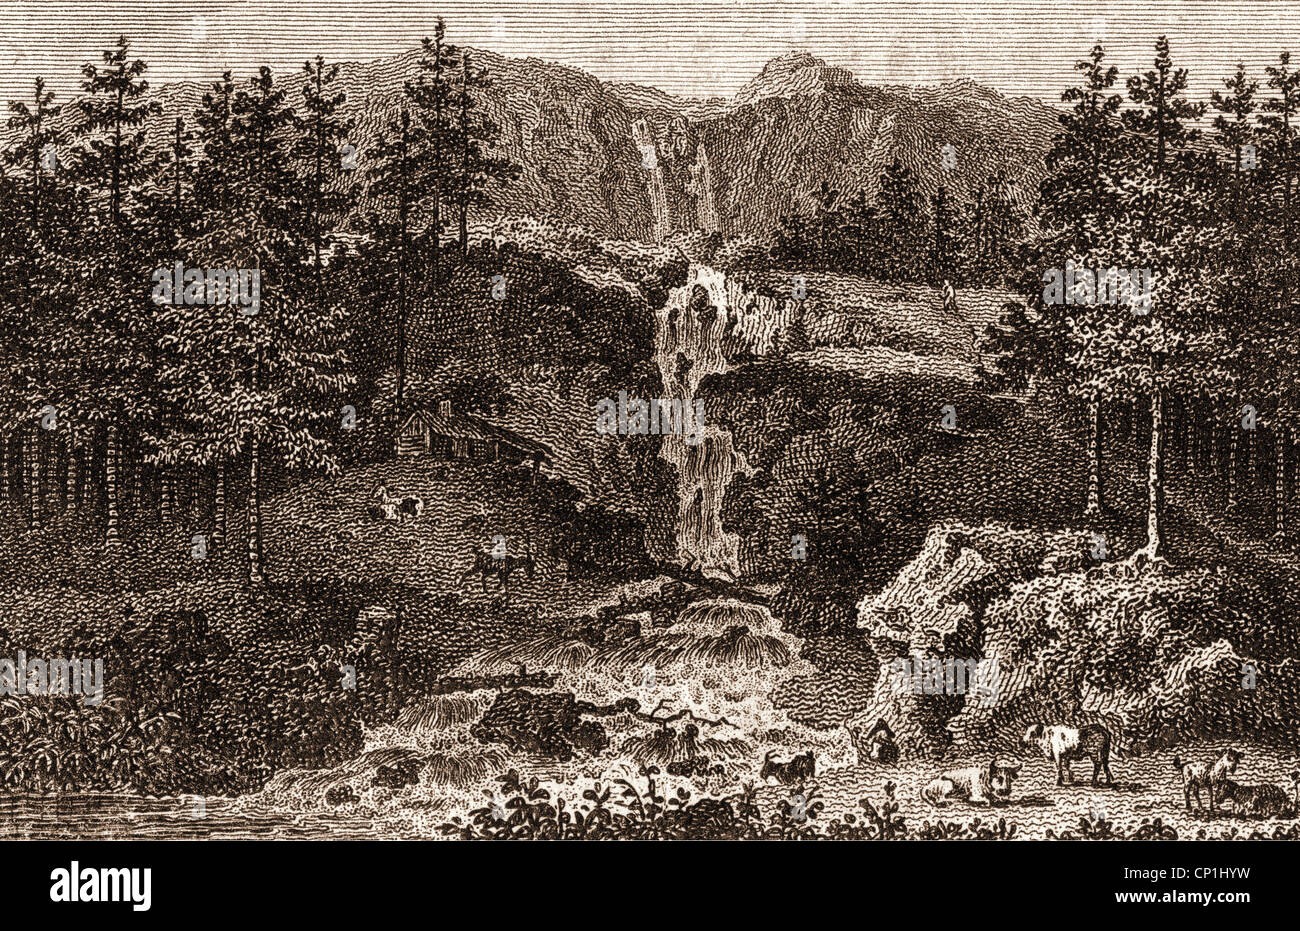 geography / travel, Czechia, landscapes, Giant Mountains, fall of river Aupa into Riesengrund, view, steel engraving by Johann Adolph Darnstedt, early 19th century, Additional-Rights-Clearences-Not Available Stock Photo